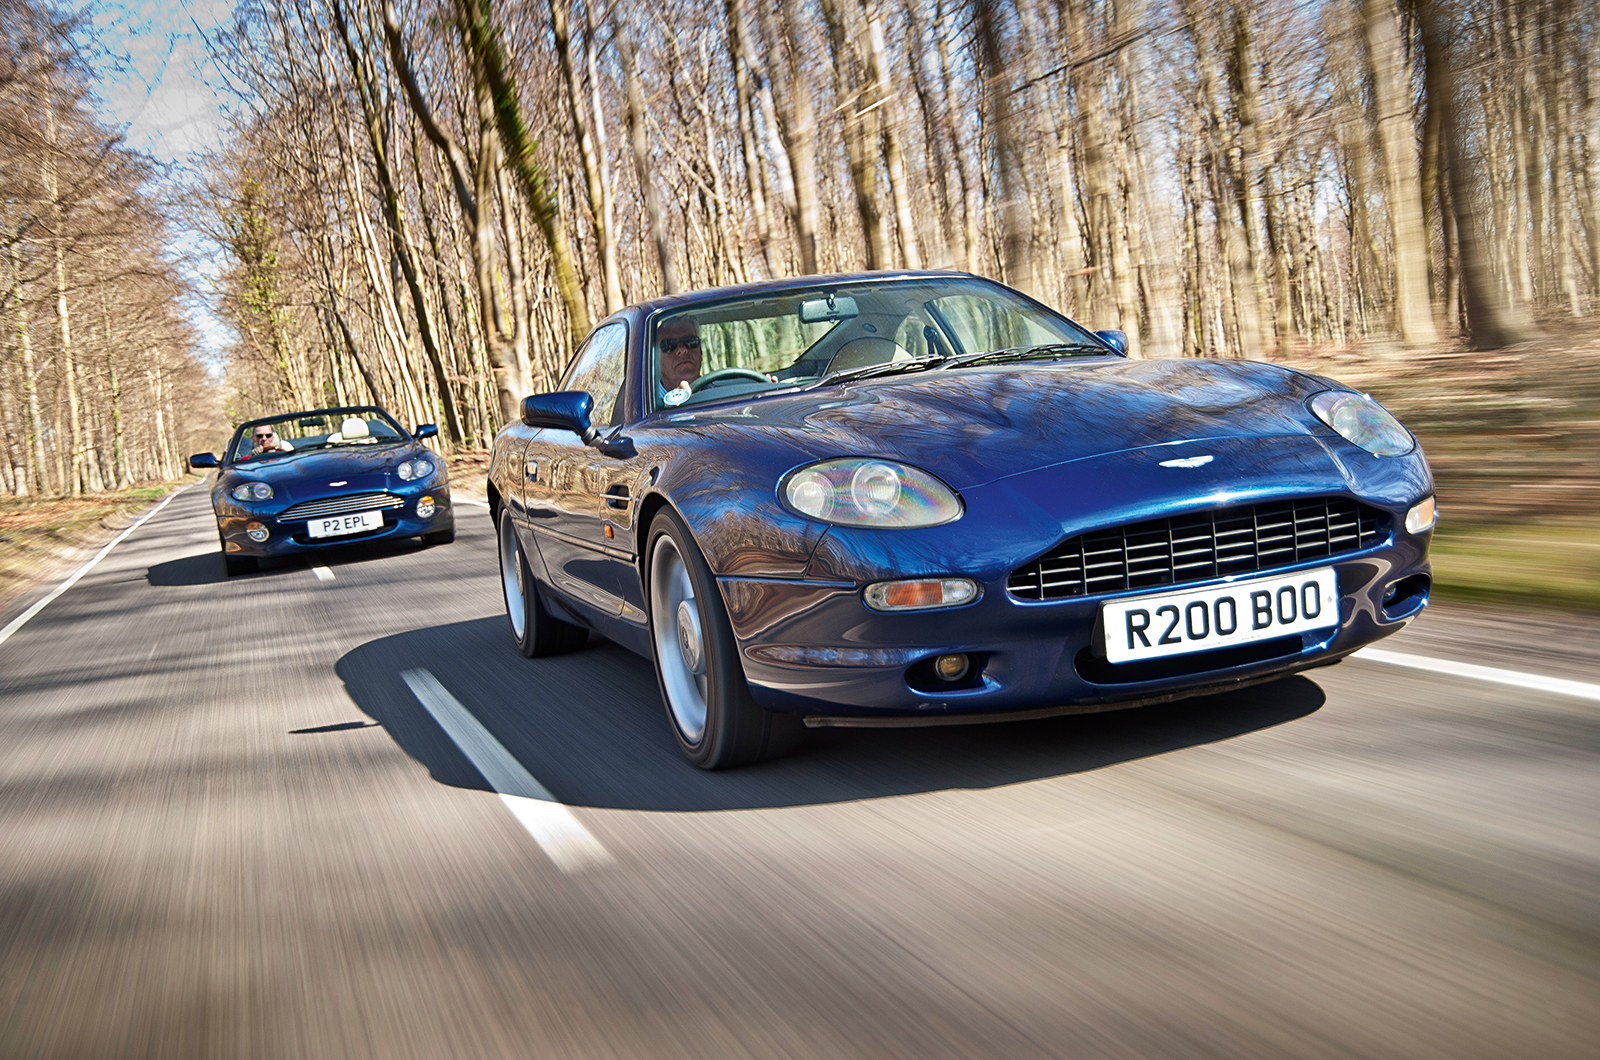 Classic & Sports Car – Don’t miss our Aston Martin Greatest Hits special